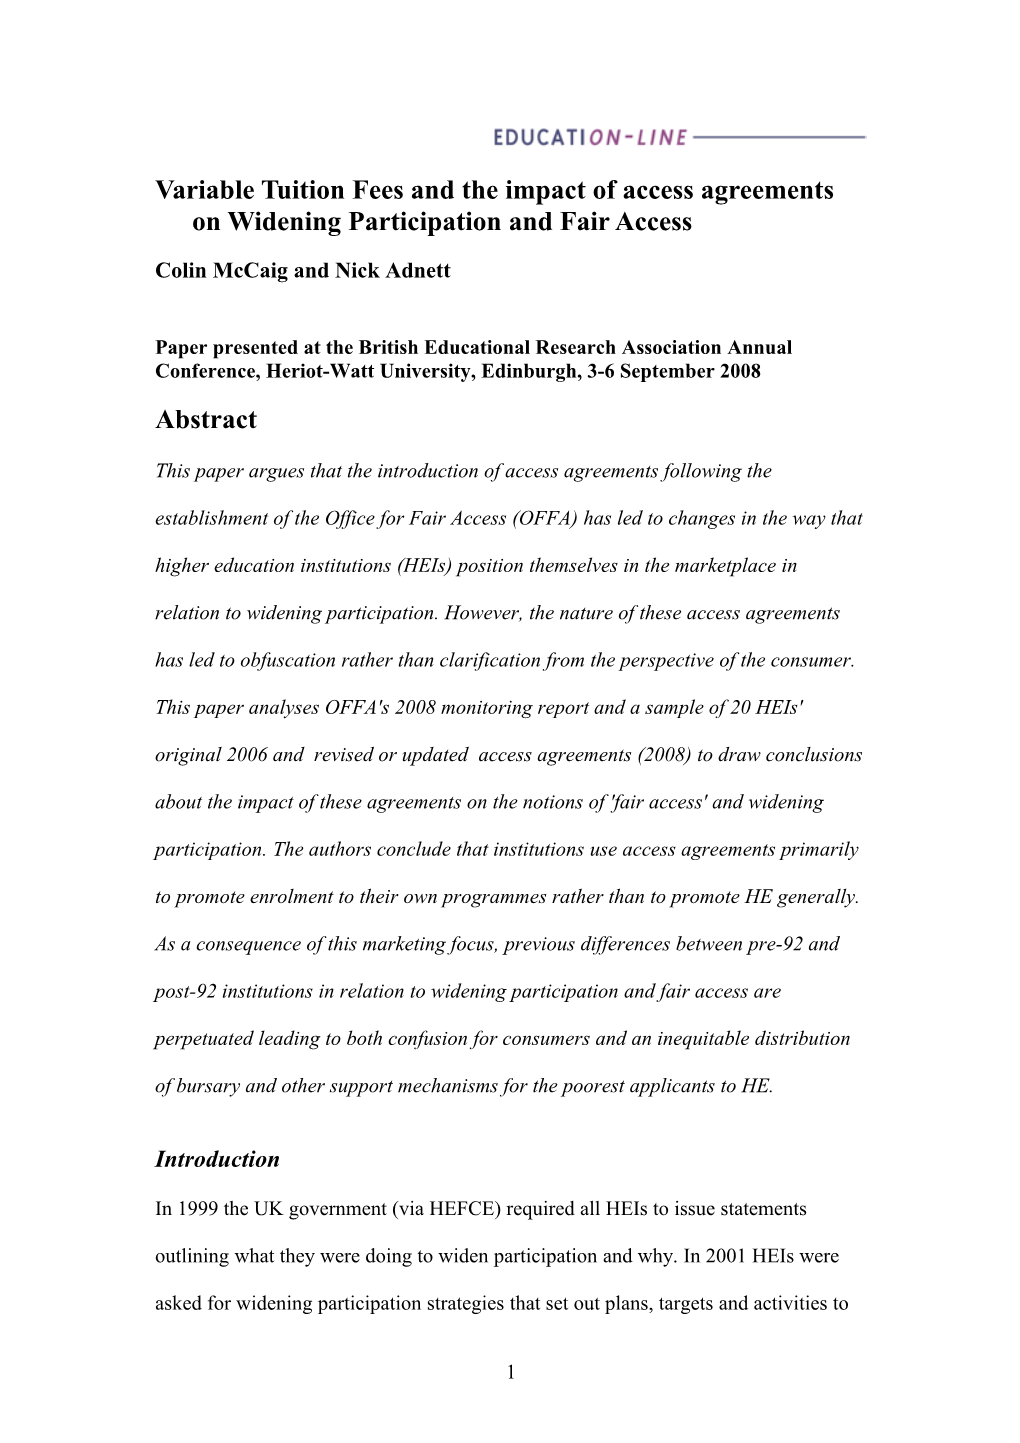 Variable Tuition Fees and the Impact of Access Agreements on Widening Participation And